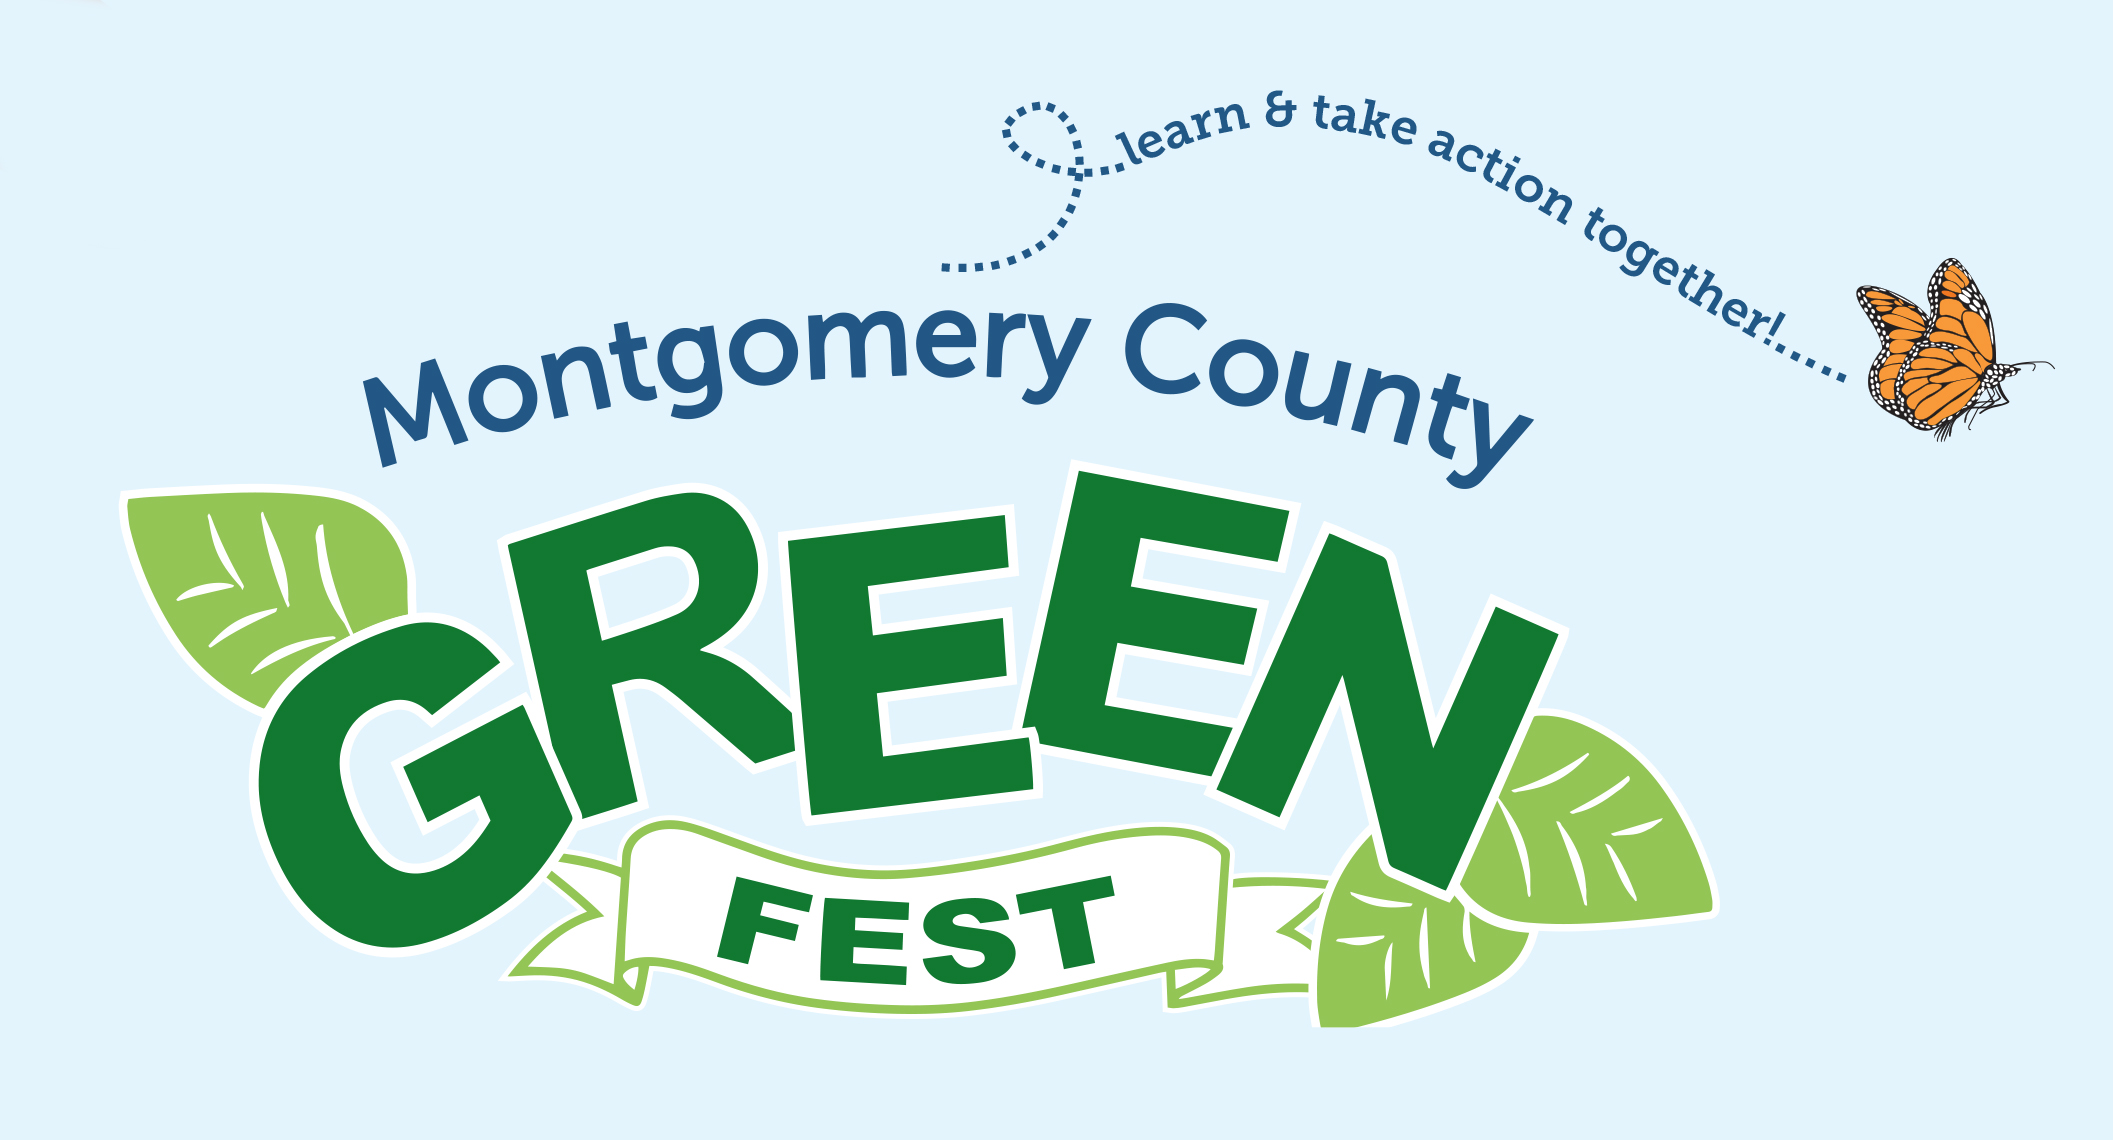 Montgomery County GreenFest logo on a light blue background